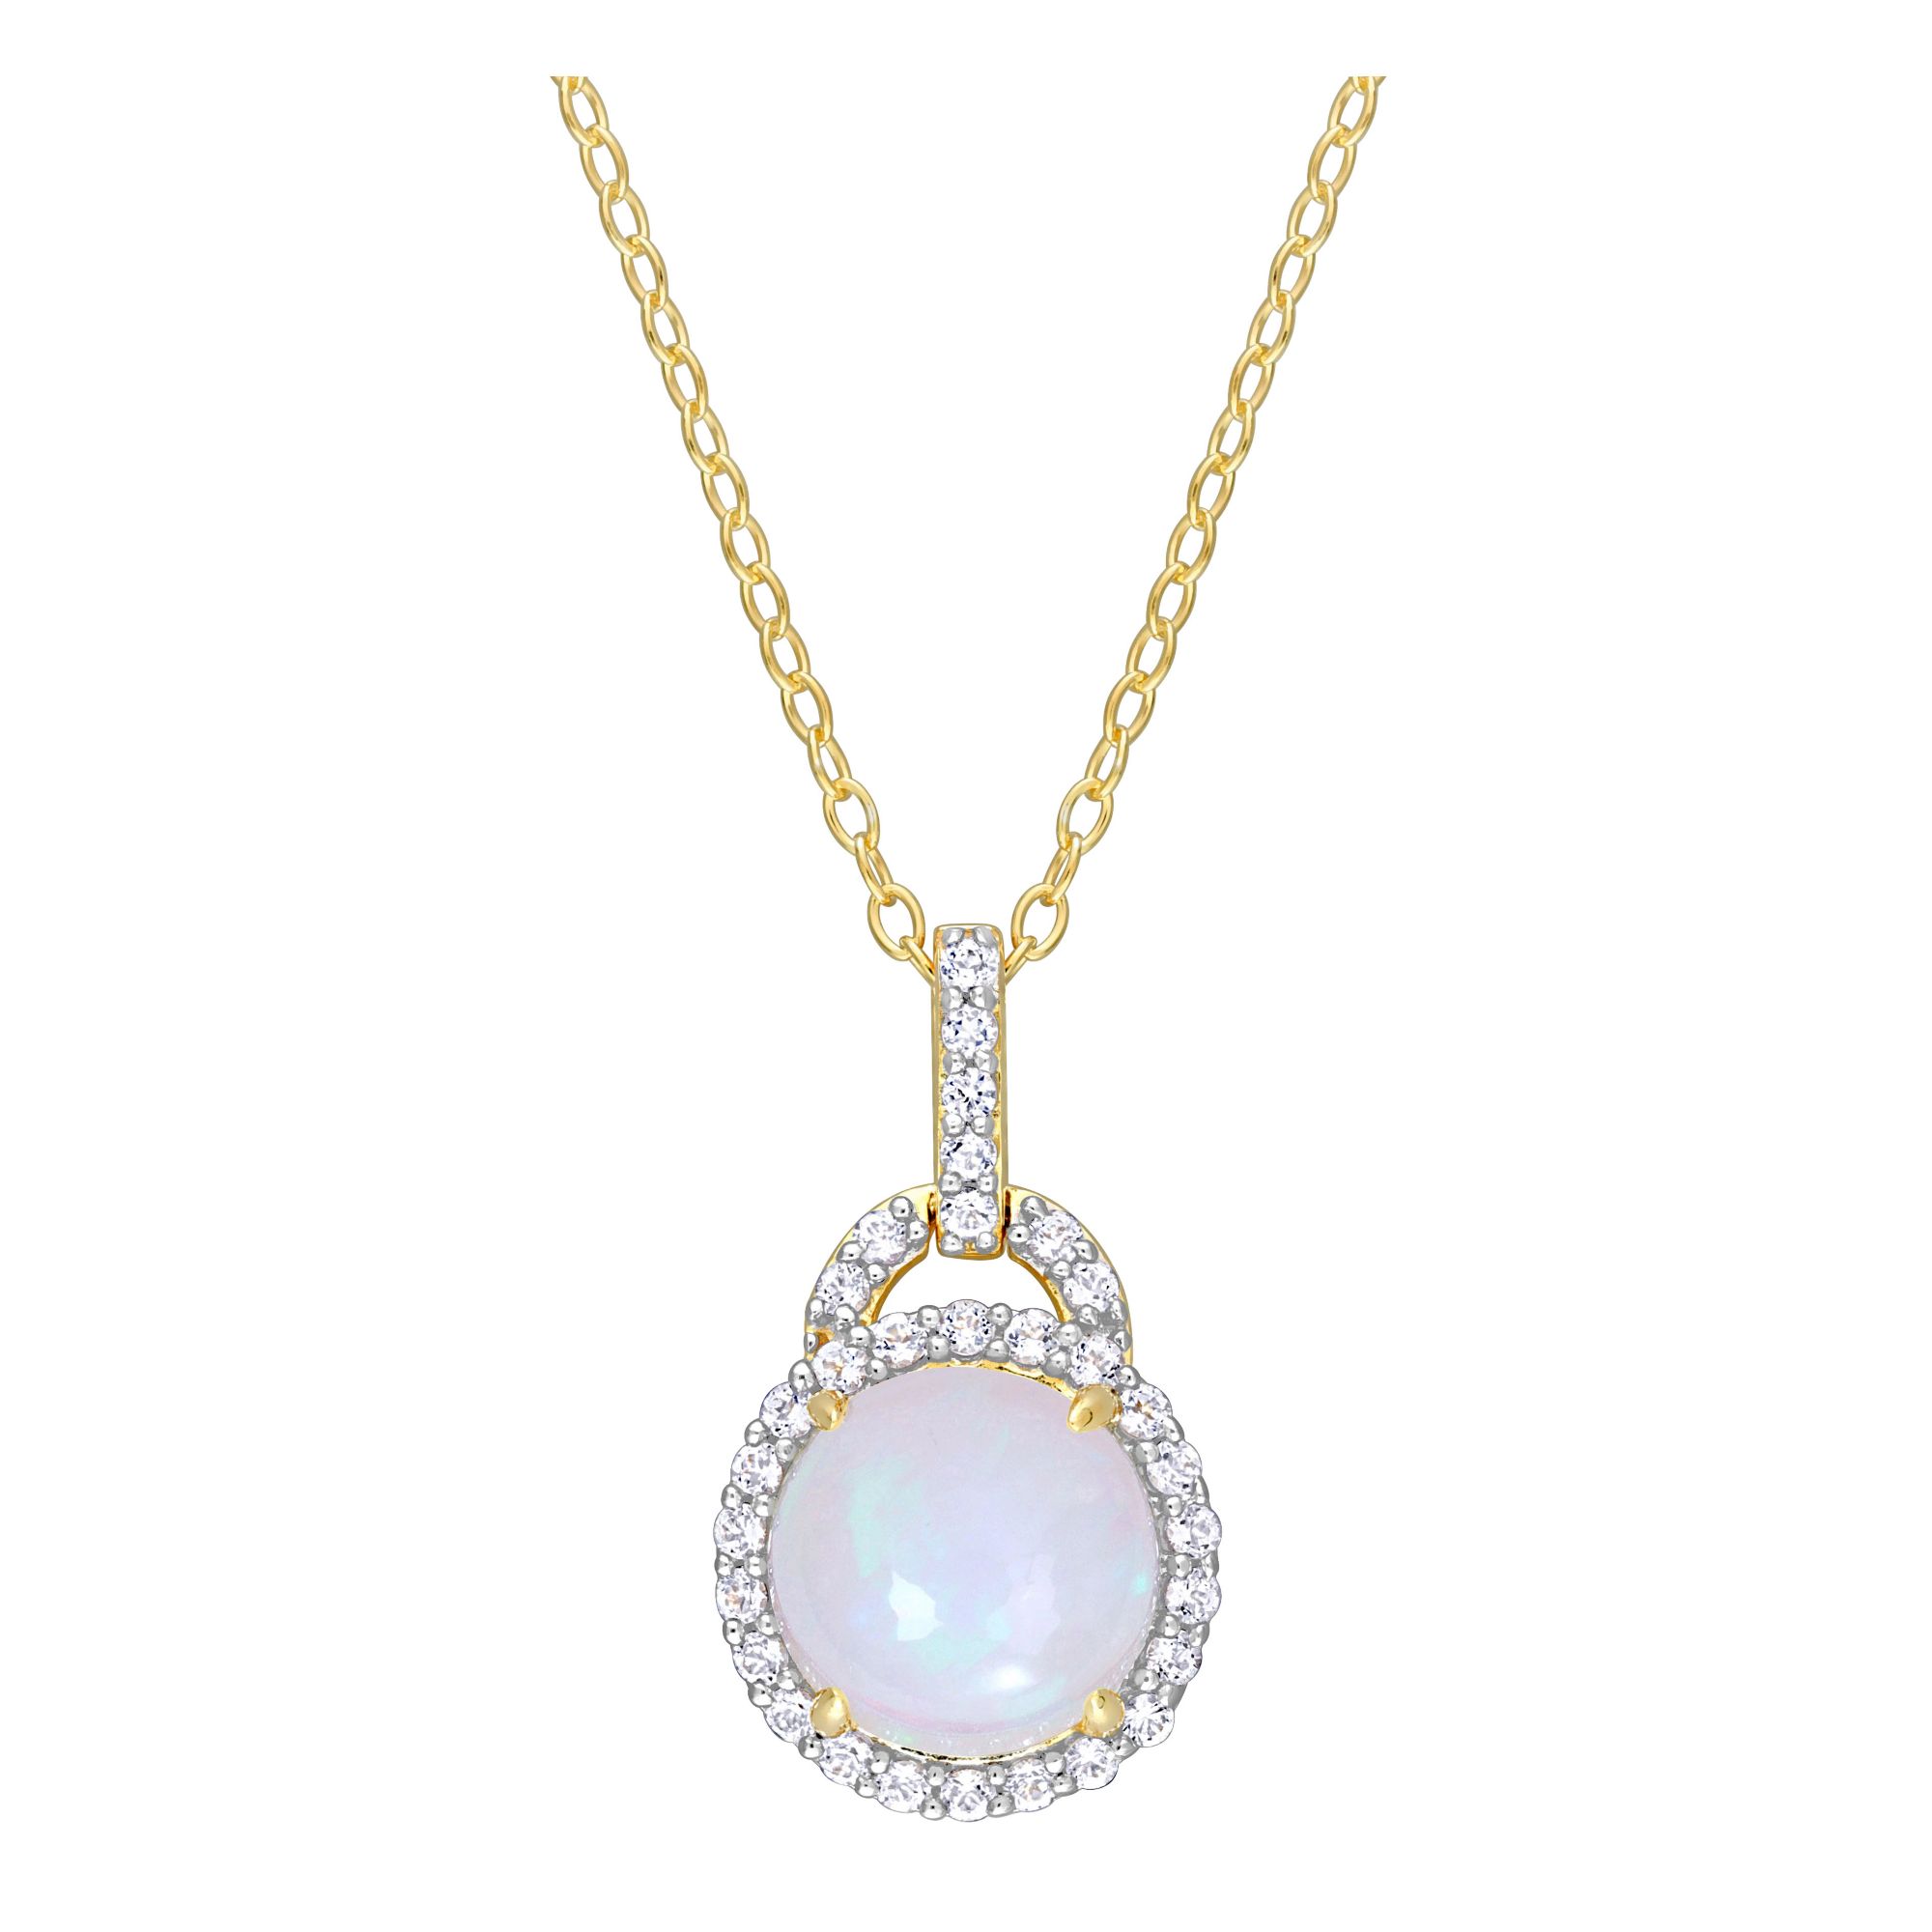 Blue Ethiopian Opal and White Topaz Halo Pendant with Chain in Yellow Plated Sterling Silver